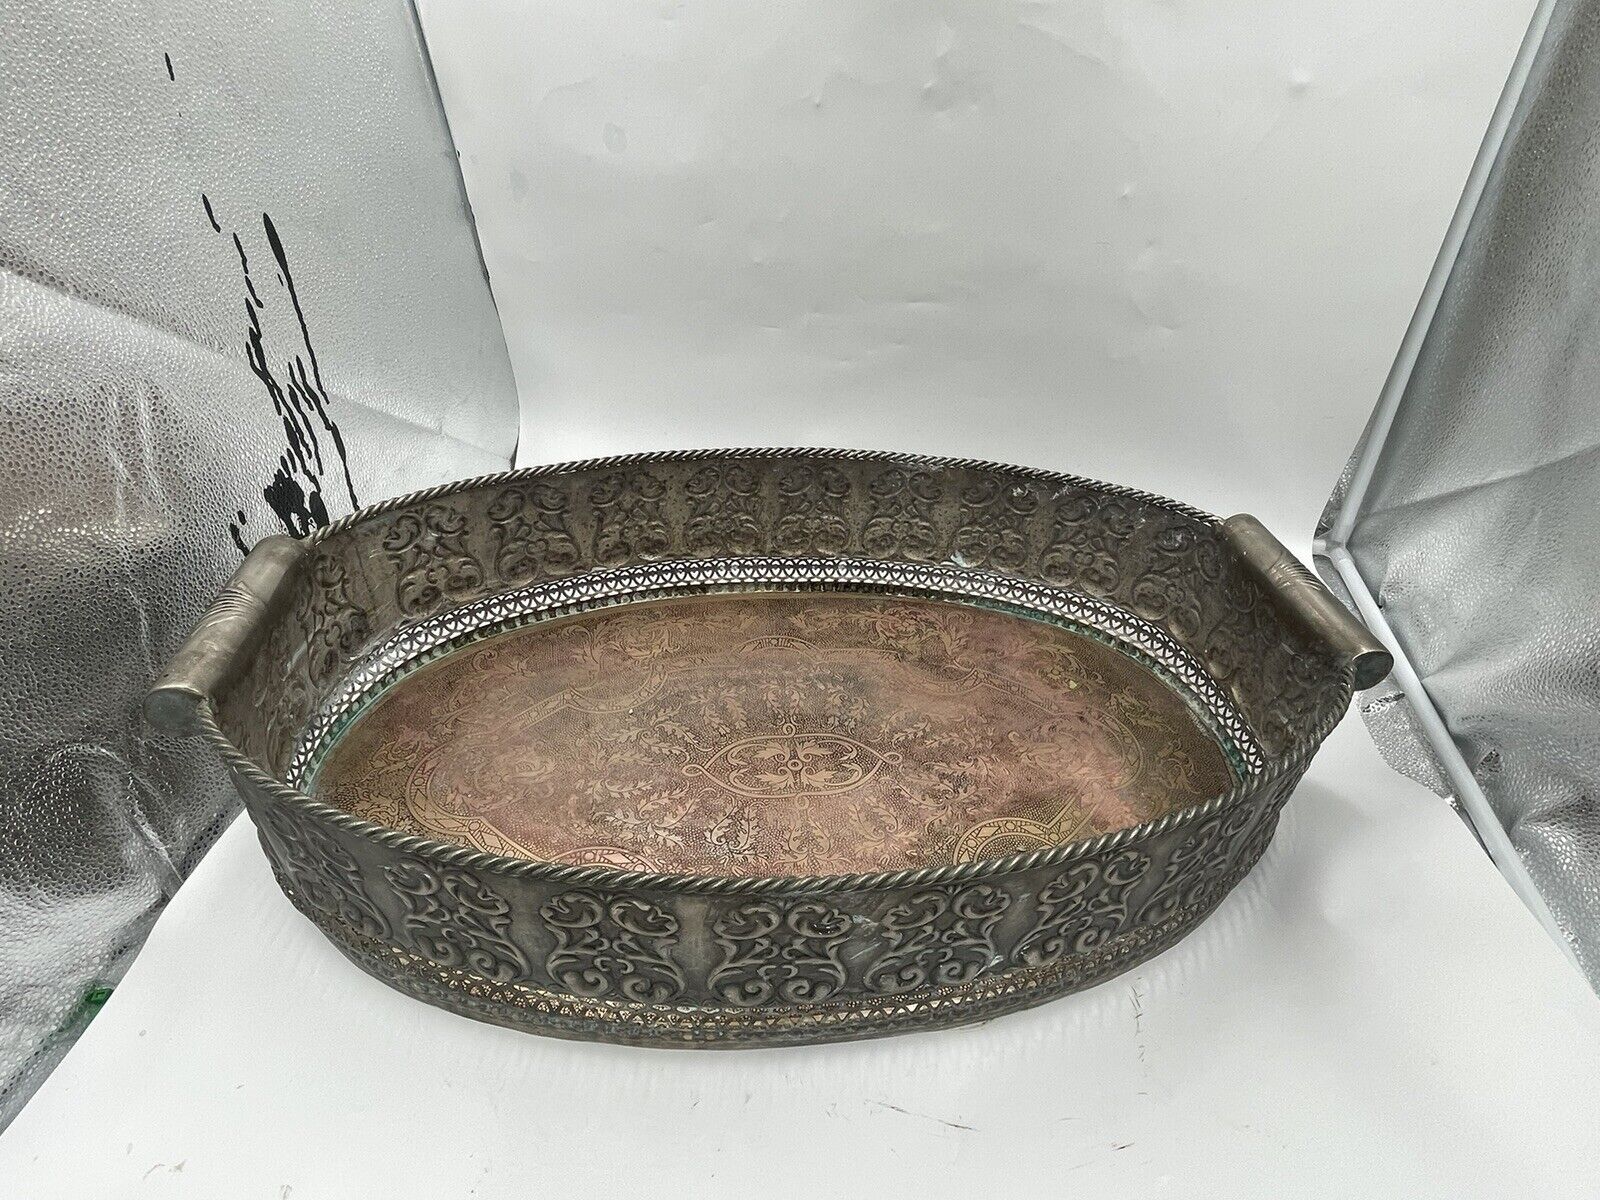 Castilian Imports Vintage Large Solid Brass Heavy Decorated Tray 27.5”X 16” X 4”